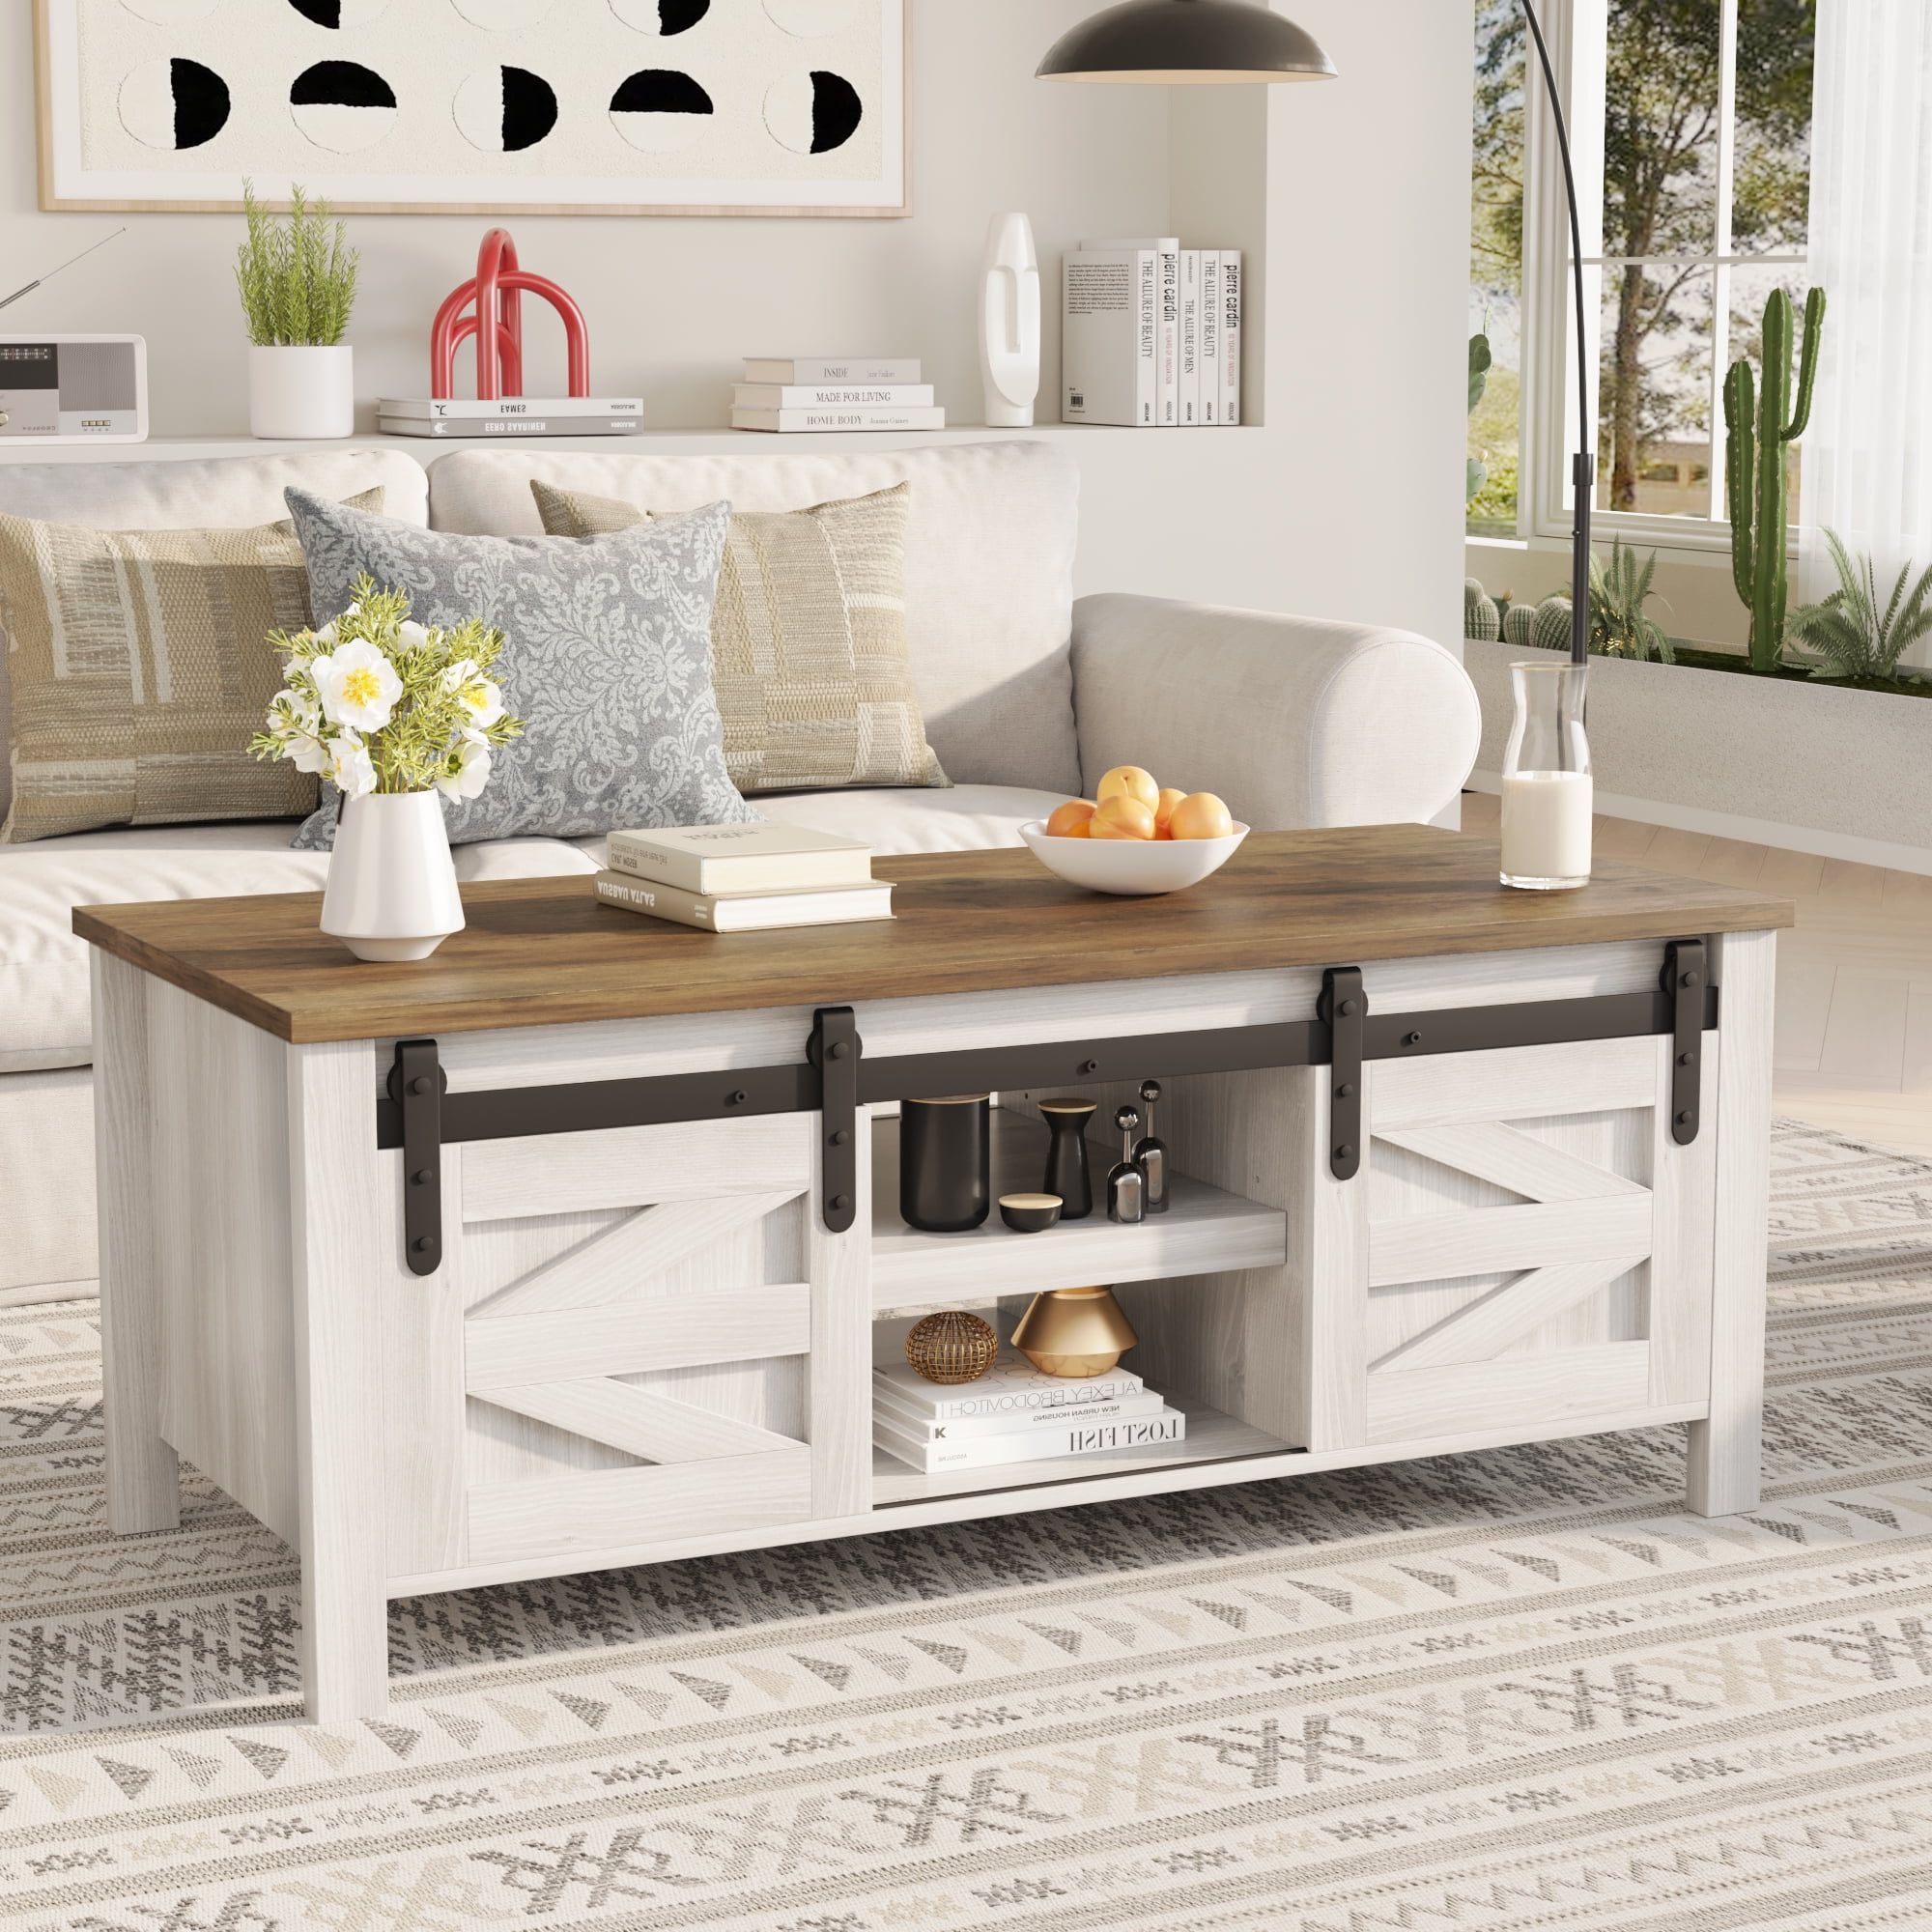 Well Known Coffee Tables With Storage And Barn Doors Regarding Homall Farmhouse Coffee Table Rustic Wooden Center Rectangular Table With Sliding  Barn Doors, Adjustable Cabinet Shelves For Bedroom, Home Office, Living  Room, White – Walmart (Photo 8 of 10)